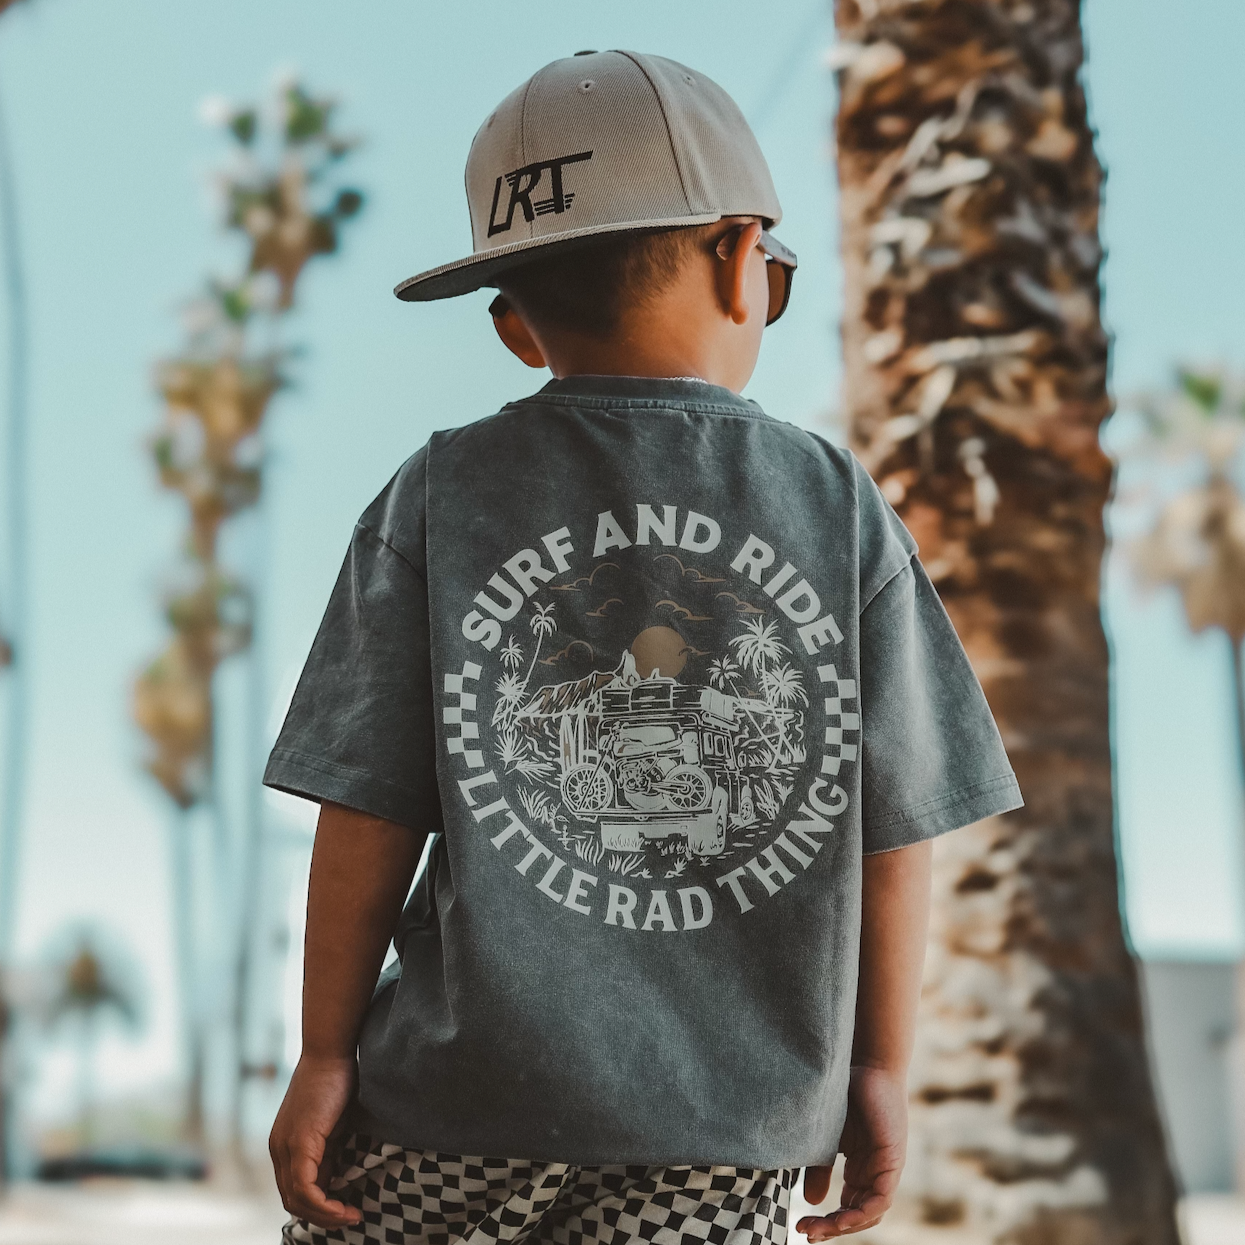 THE SURF N RIDE TEE - Graphic Tees for Toddlers